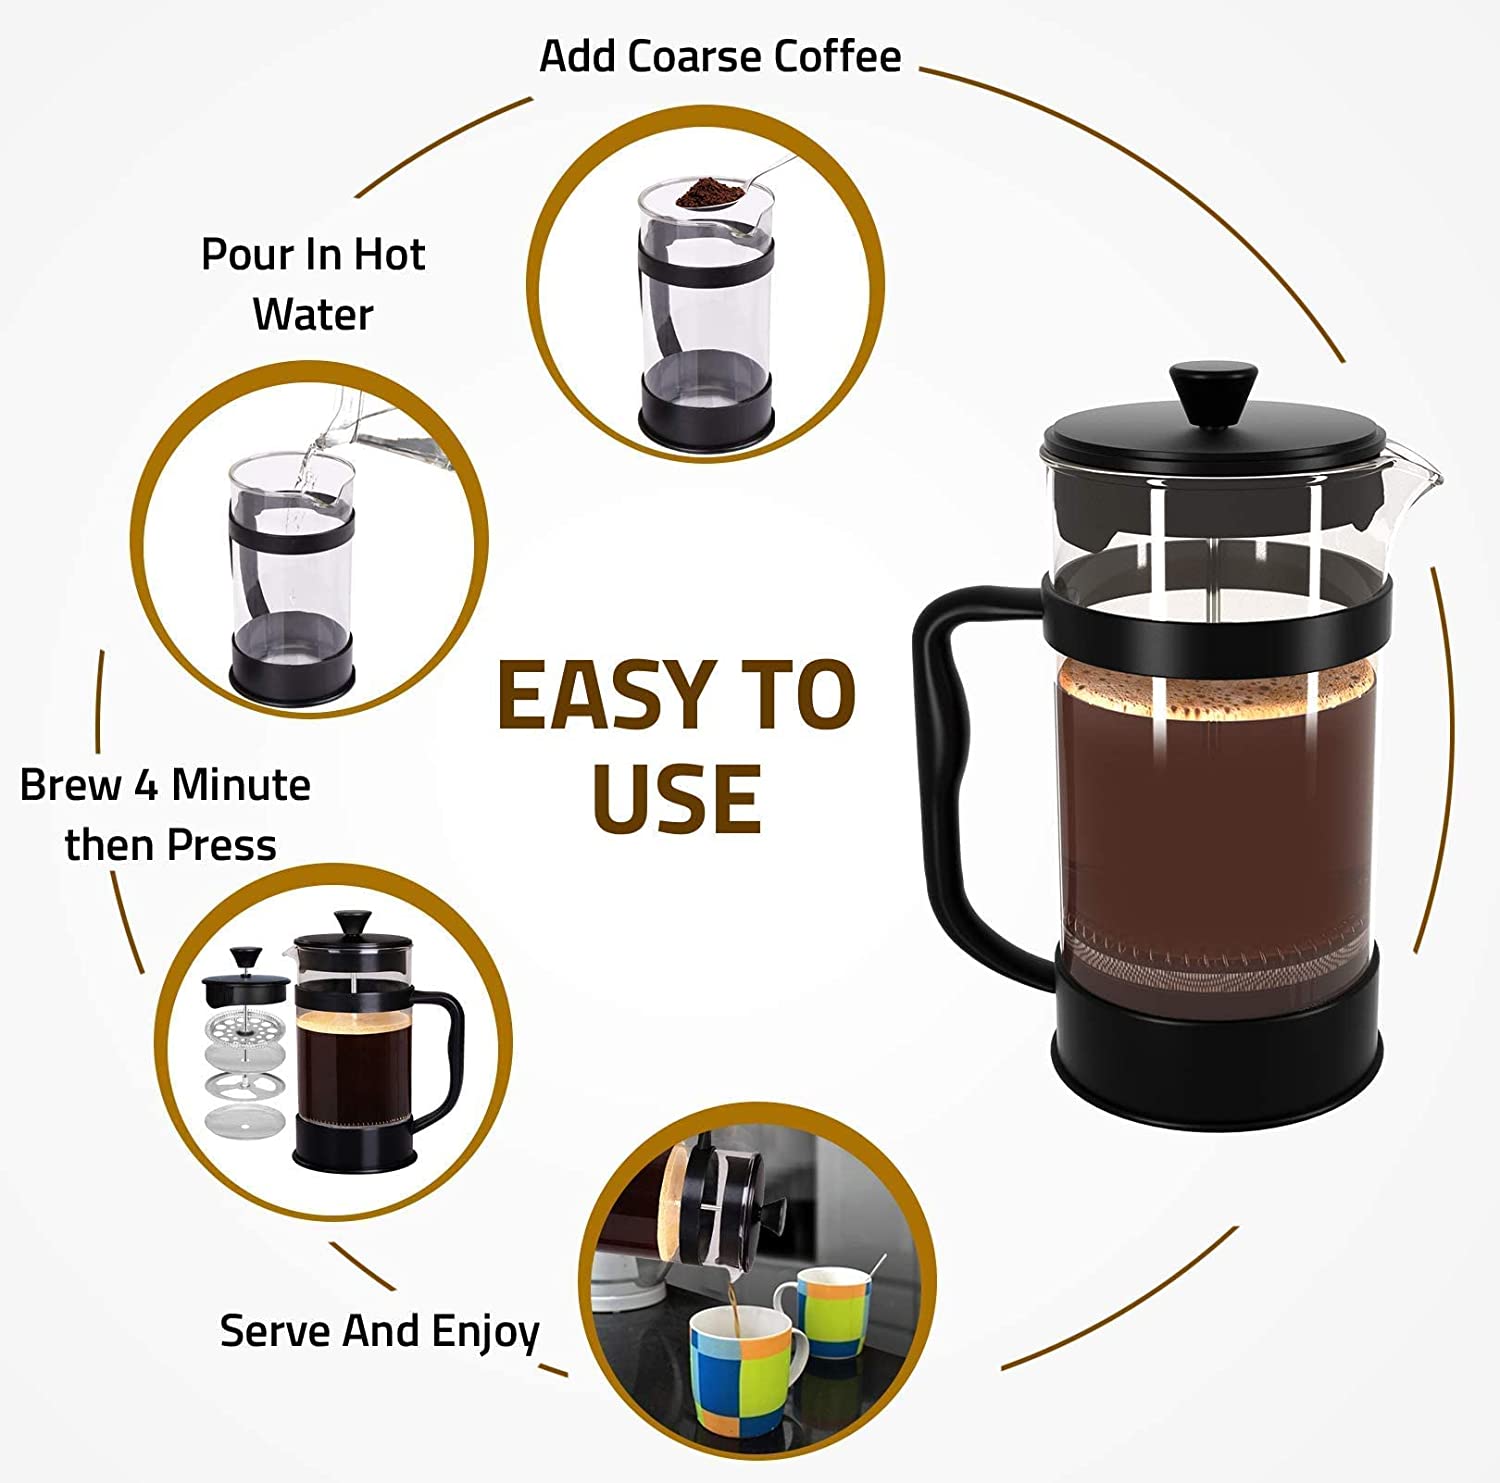 French Press 34 Ounce with Triple Filters. – Chapora Coffee